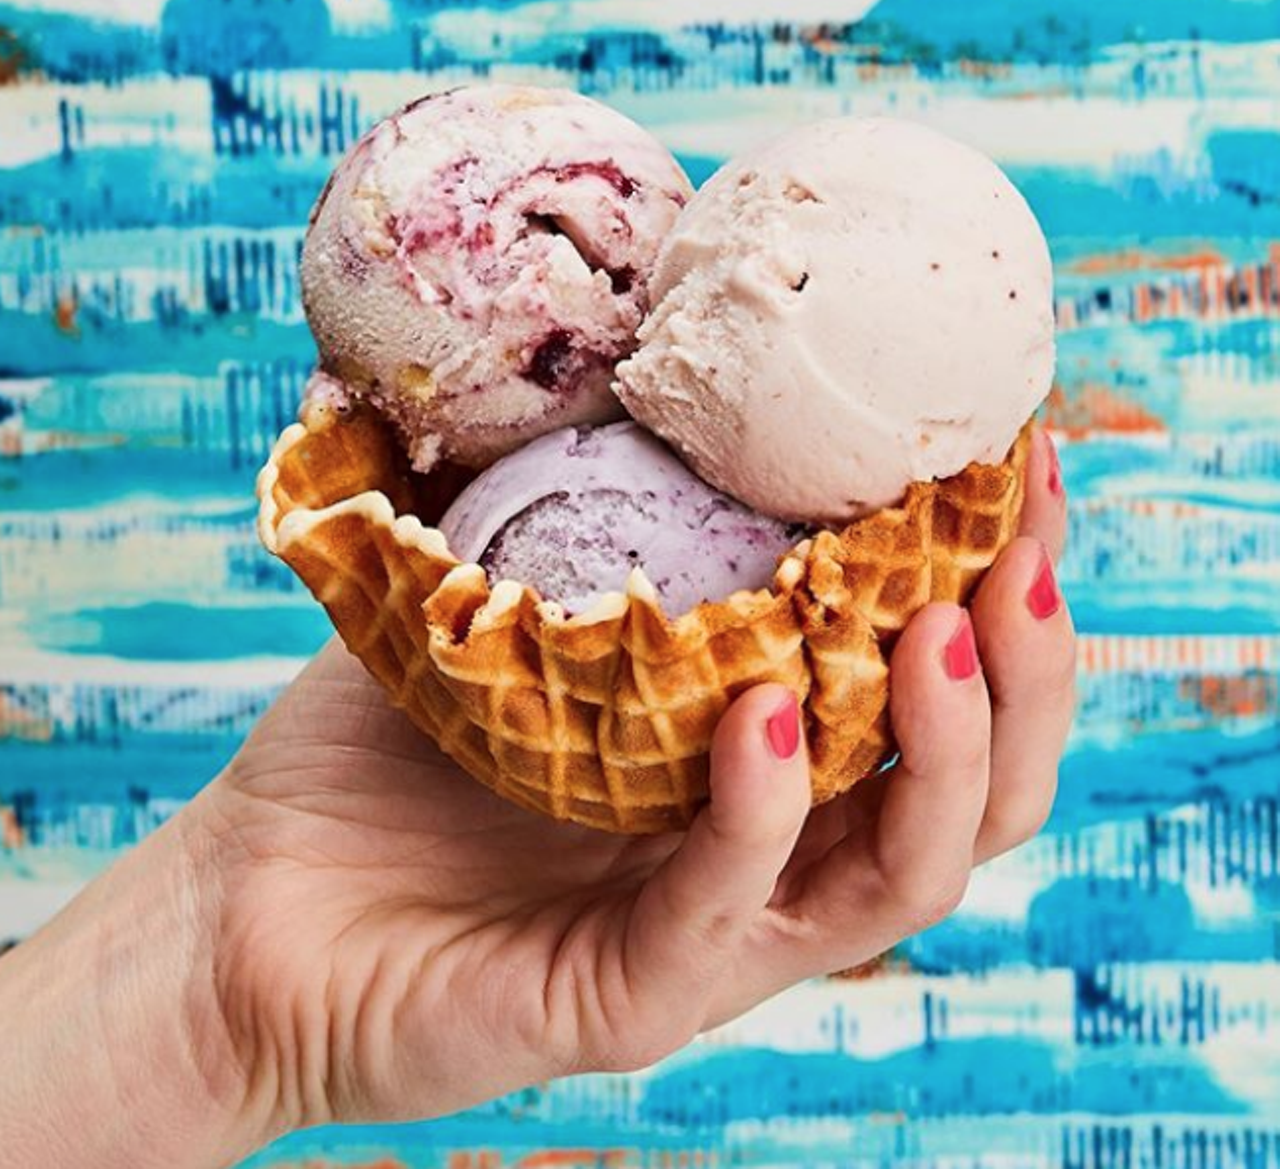 Lick Honest Ice Creams
312 Pearl Pkwy #2101, (210) 314-8166, ilikelick.com
With a second San Antonio location in the works, Austin’s Lick Honest Ice Creams brings Texas-inspired flavors using ingredients from regional sources. How much more Texas can this place get?!
Photo via Instagram / lickicecreams